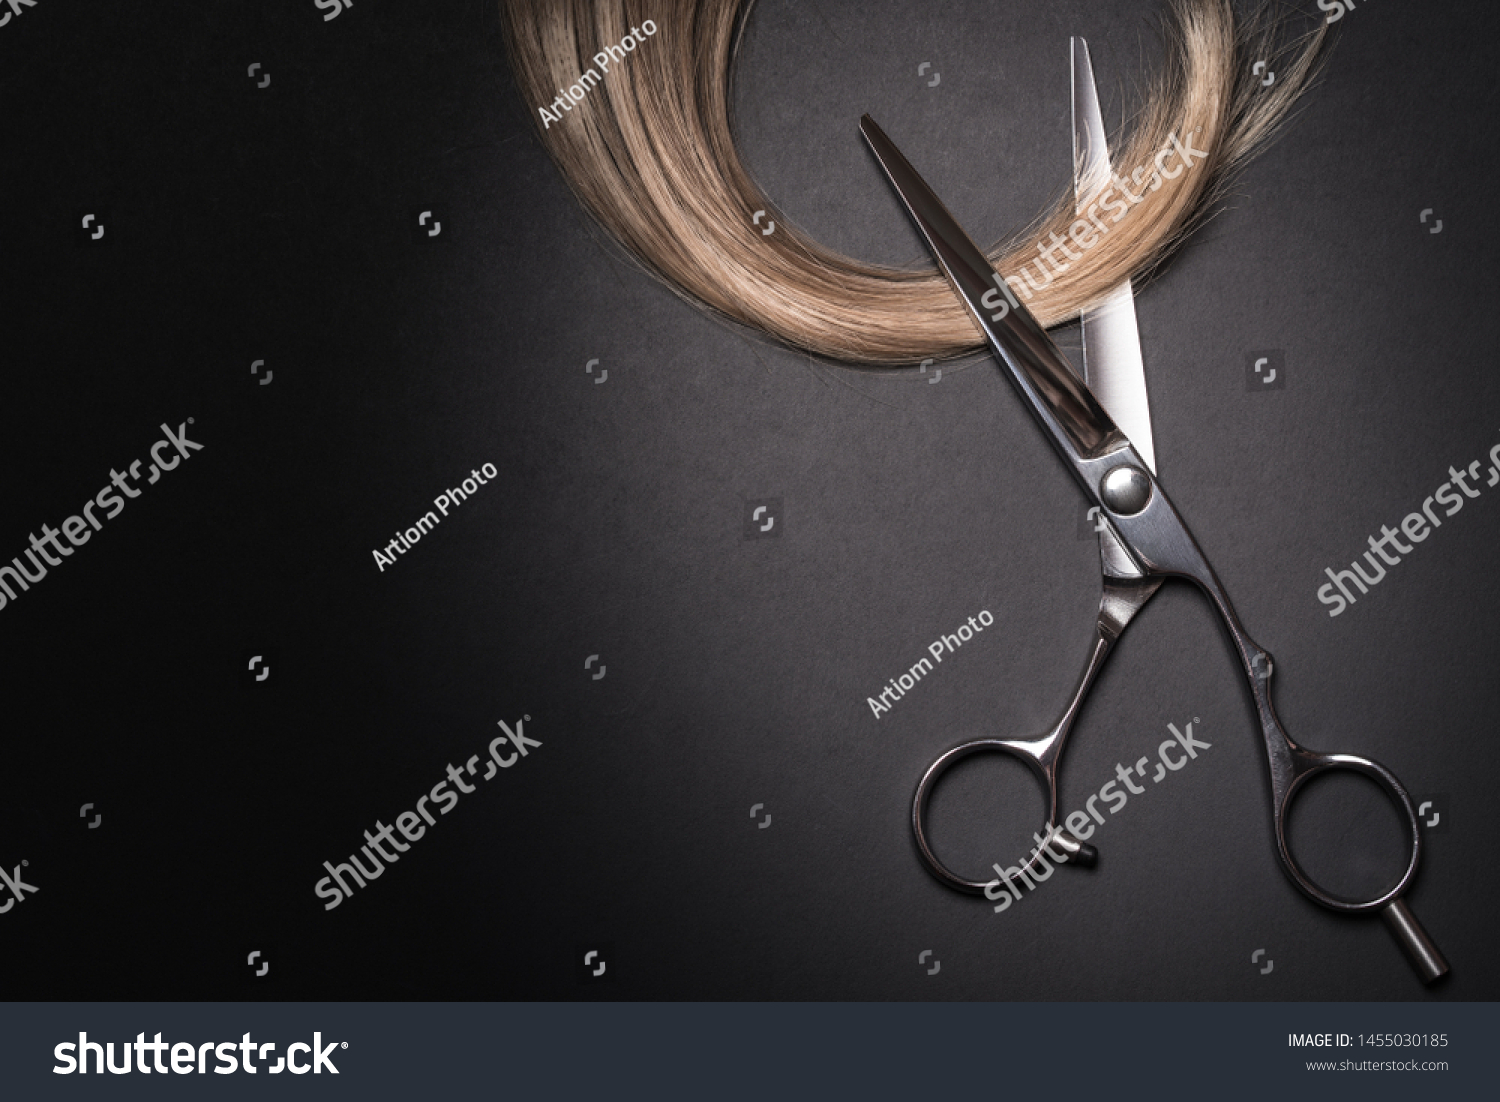 Scissors and piece of blond hair. Professional barber hair cutting shears on black background. Hairdresser salon equipment concept, premium hairdressing set. Accessories for haircut with copy space #1455030185